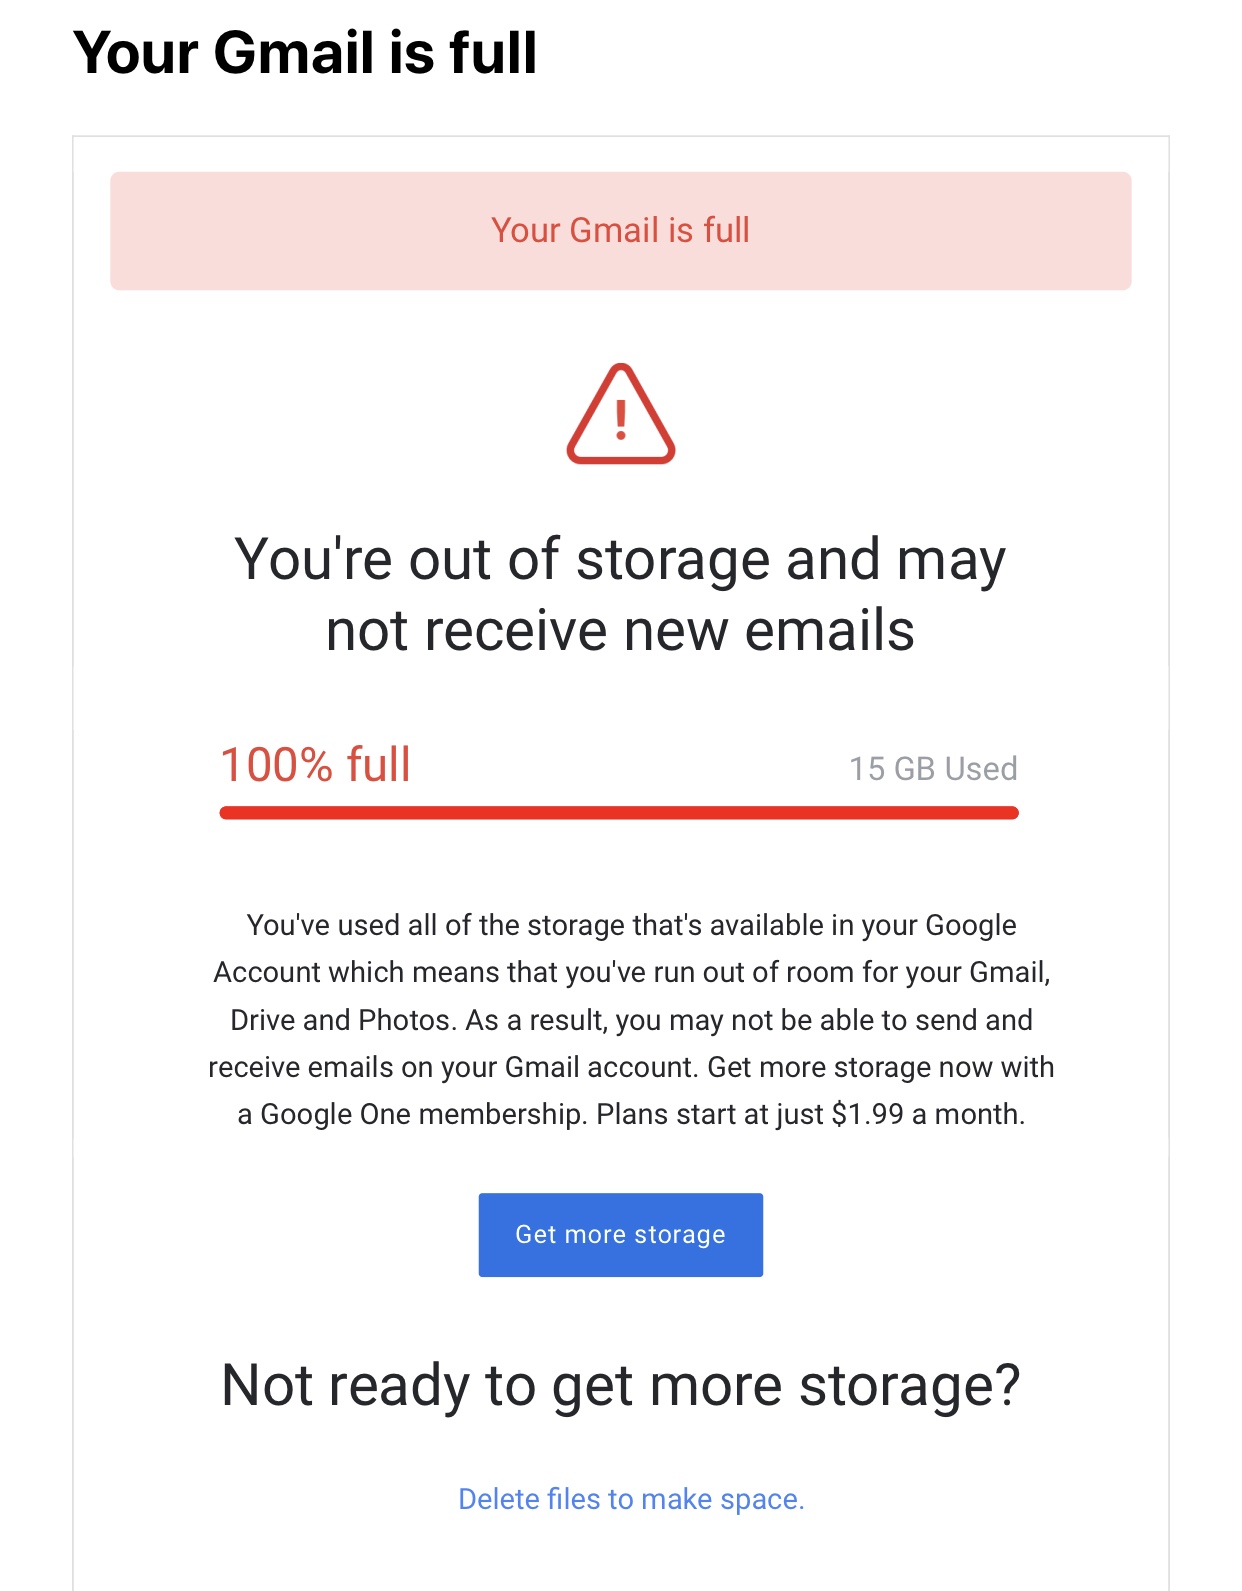 Why does Google One keep telling me I'm out of storage? Am using 